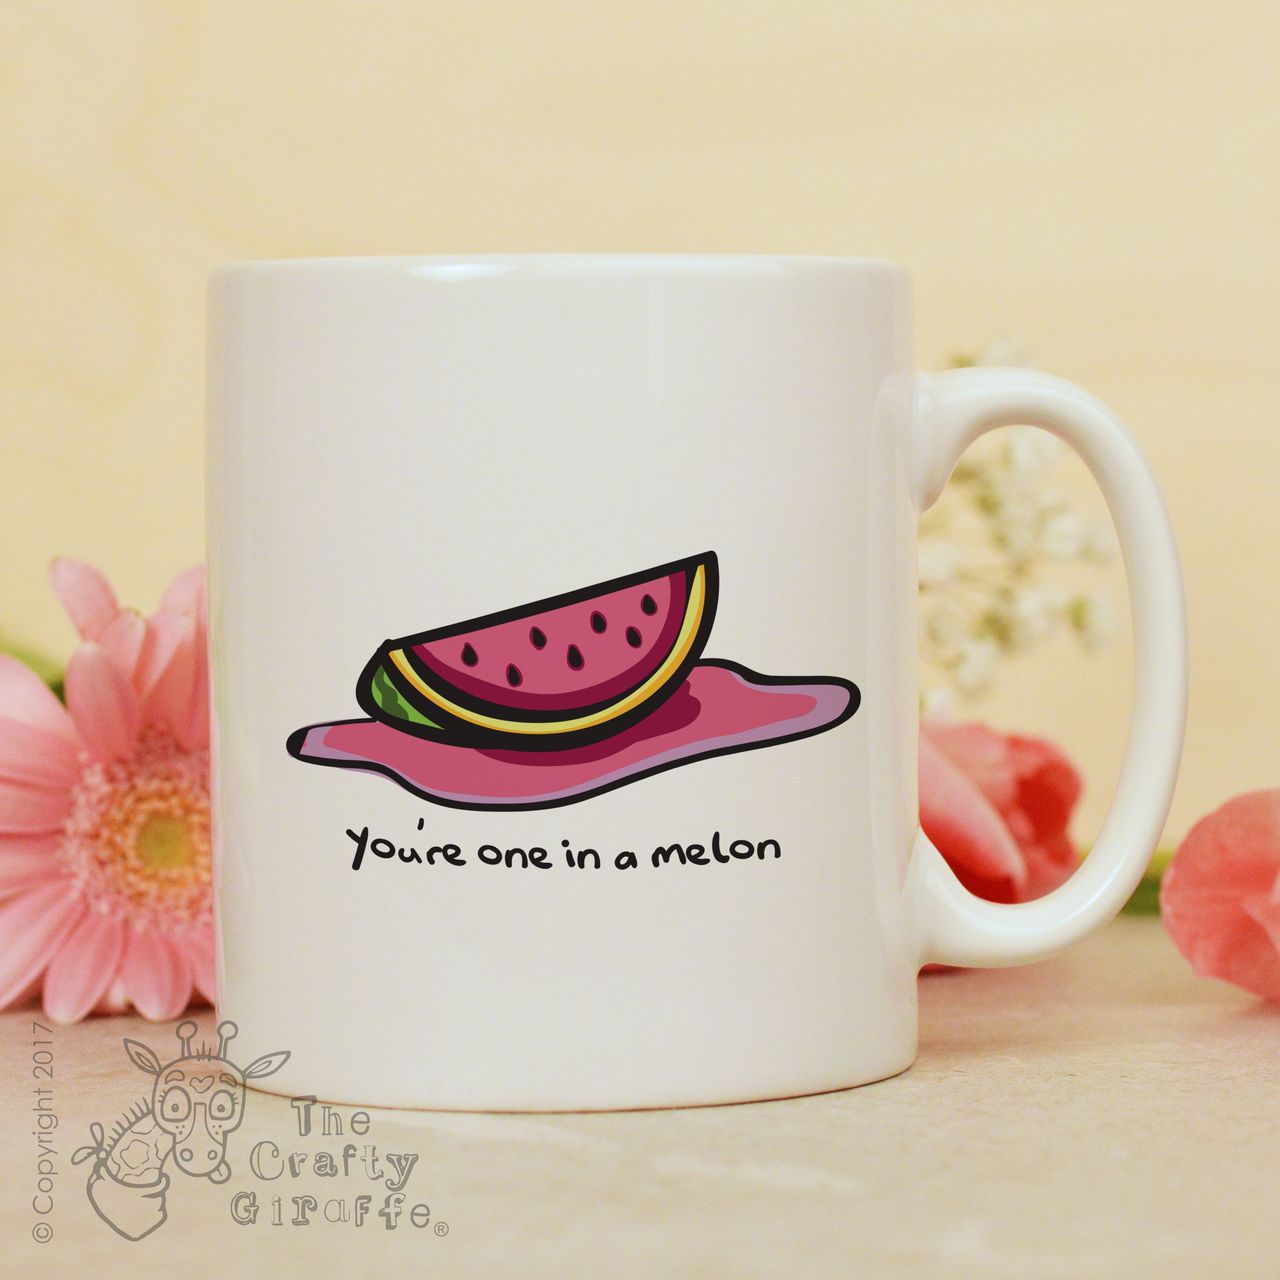 You’re one in a melon mug